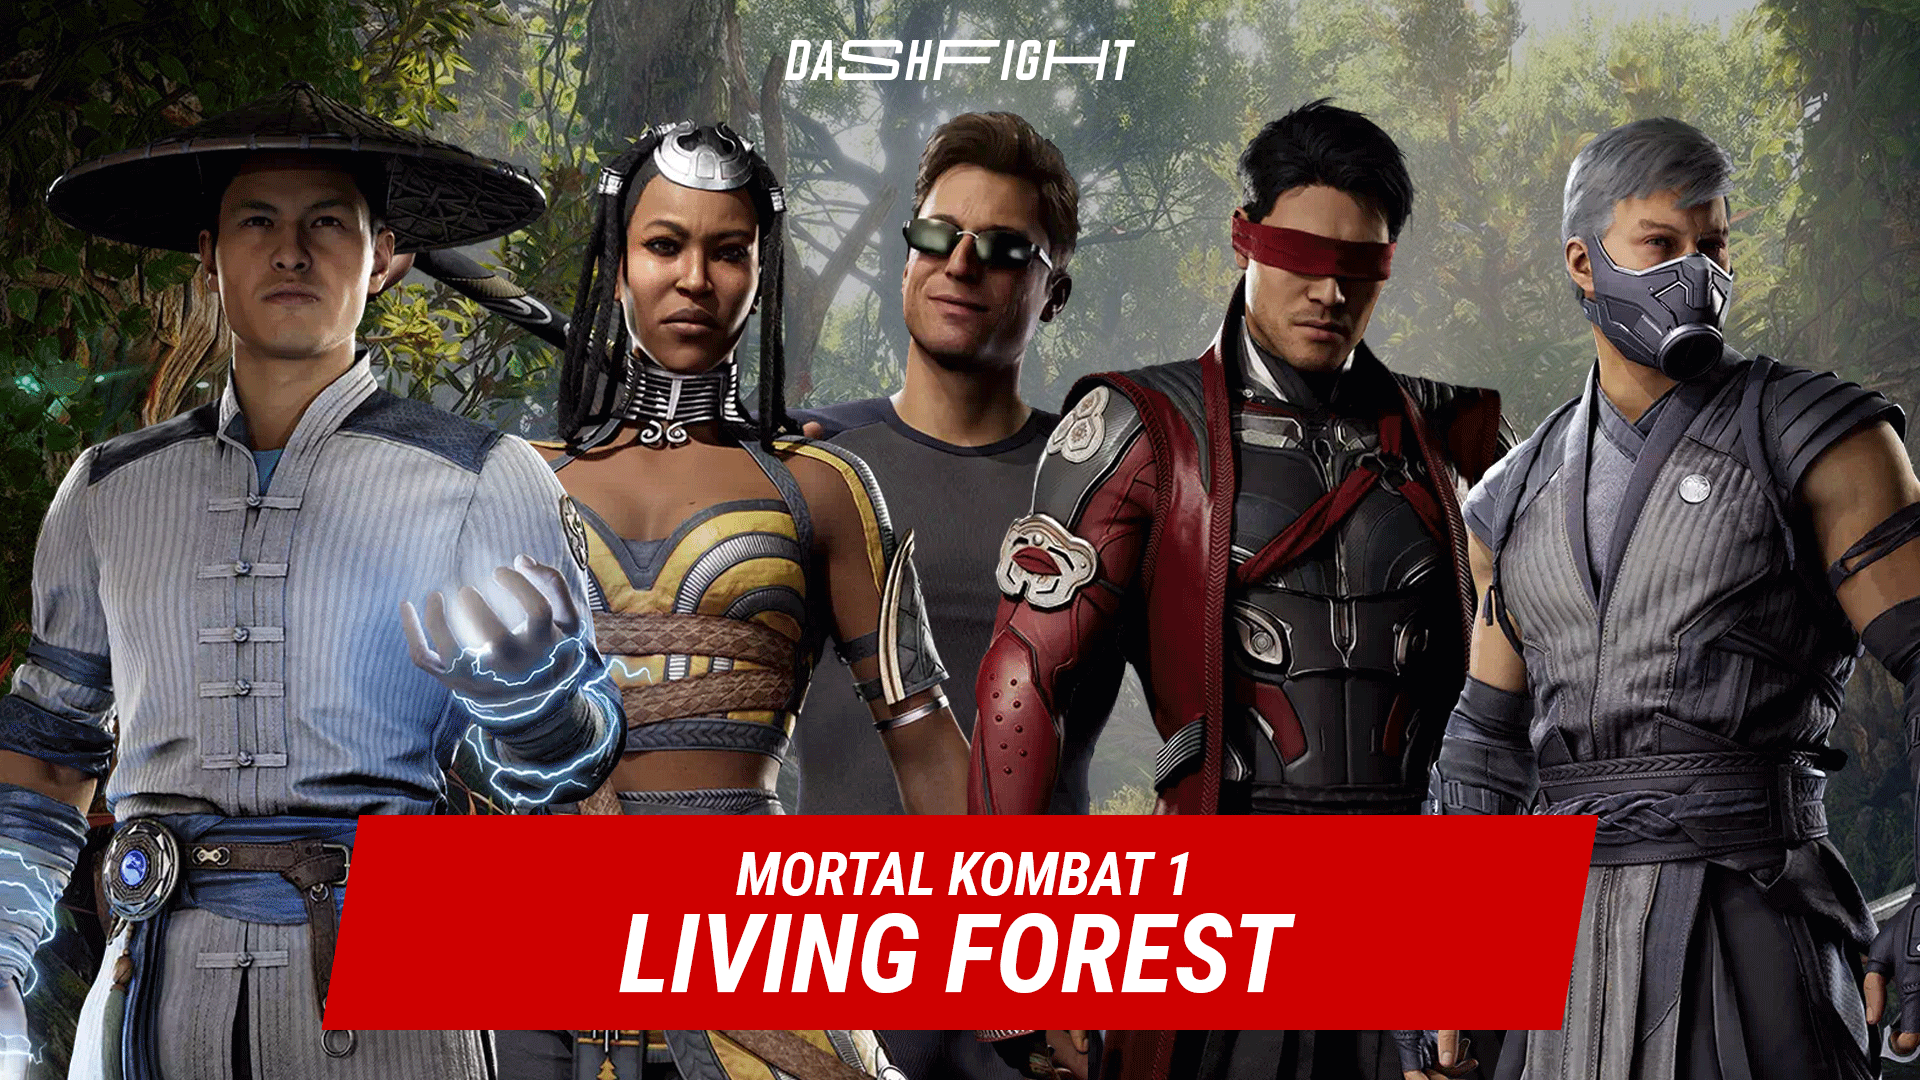 Mortal Kombat 1 - Invasions "The Spectre" Living Forest Mesa Guide